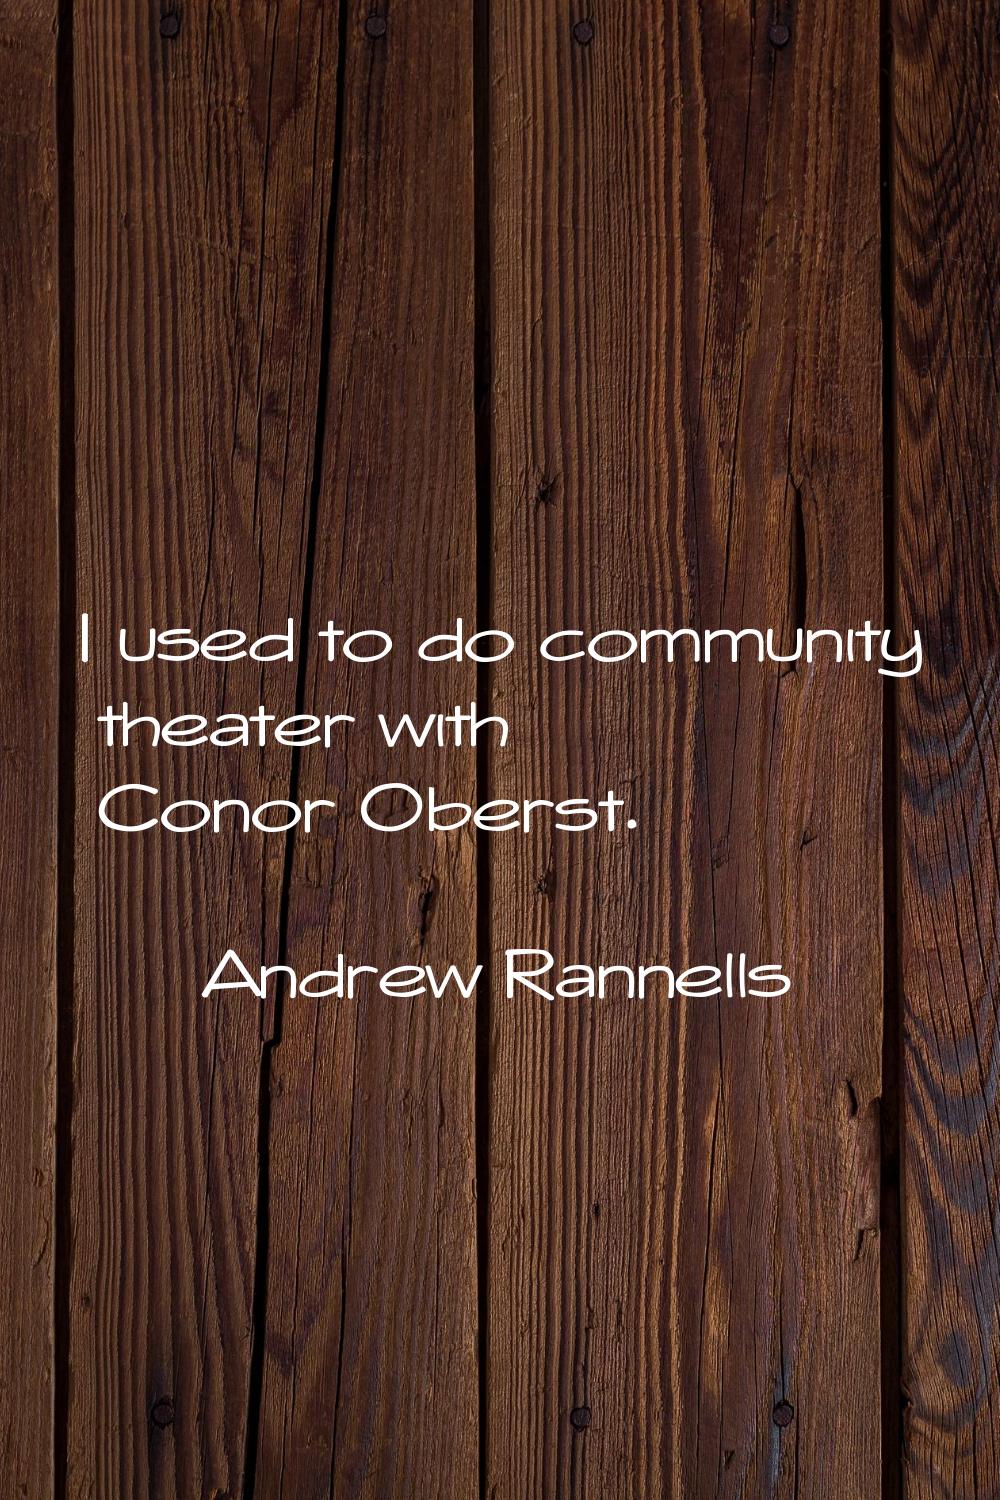 I used to do community theater with Conor Oberst.